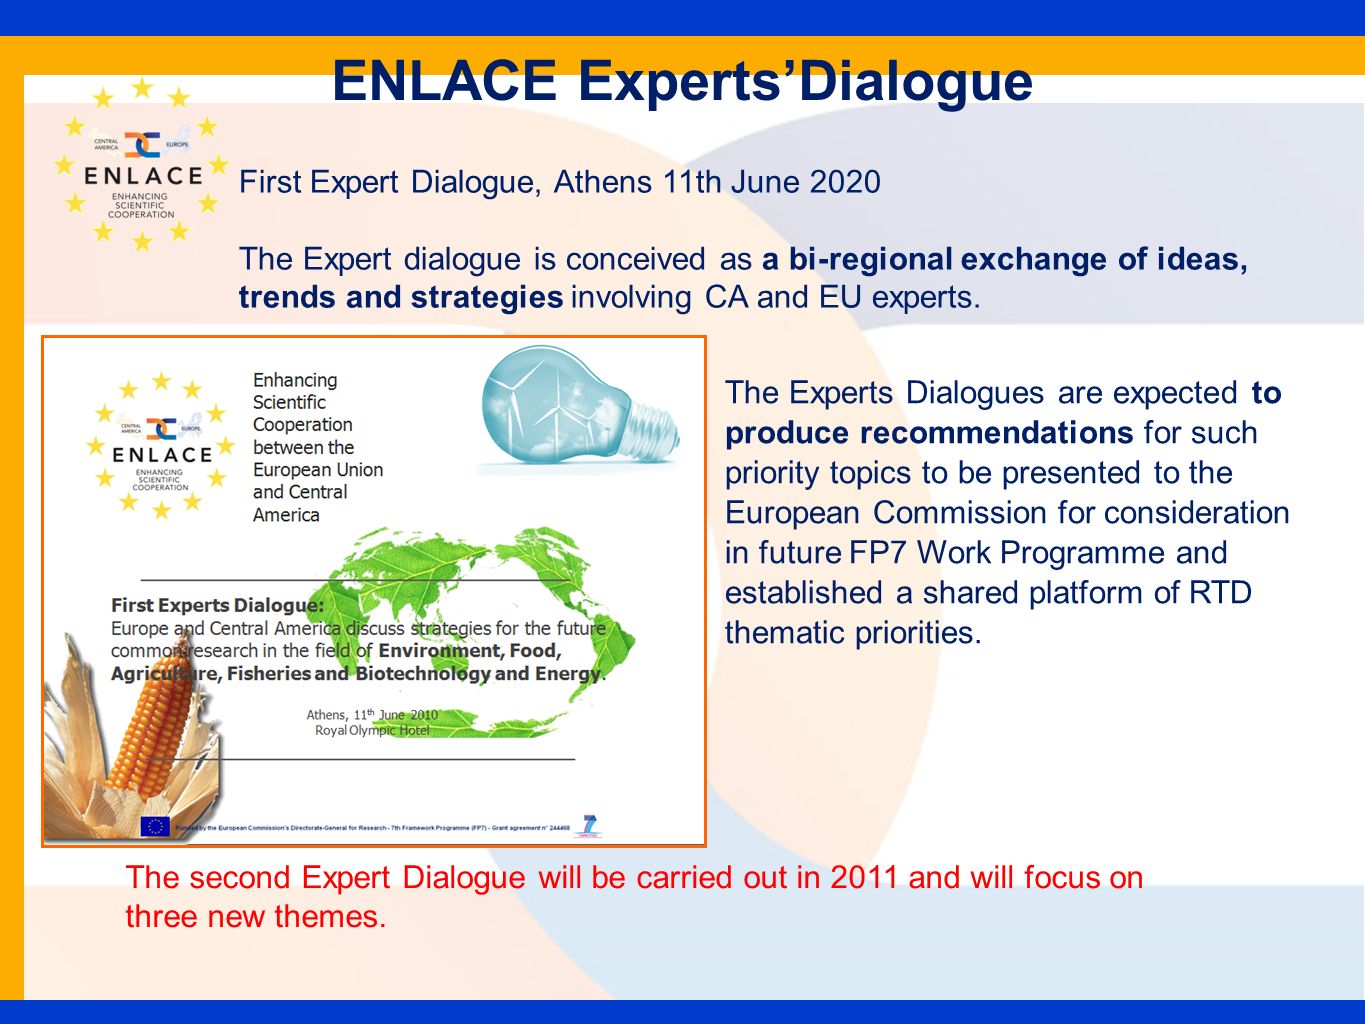 ENLACE ExpertsDialogue The Experts Dialogues are expected to produce recommendations for such priority topics to be presented to the European Commission for consideration in future FP7 Work Programme and established a shared platform of RTD thematic priorities.